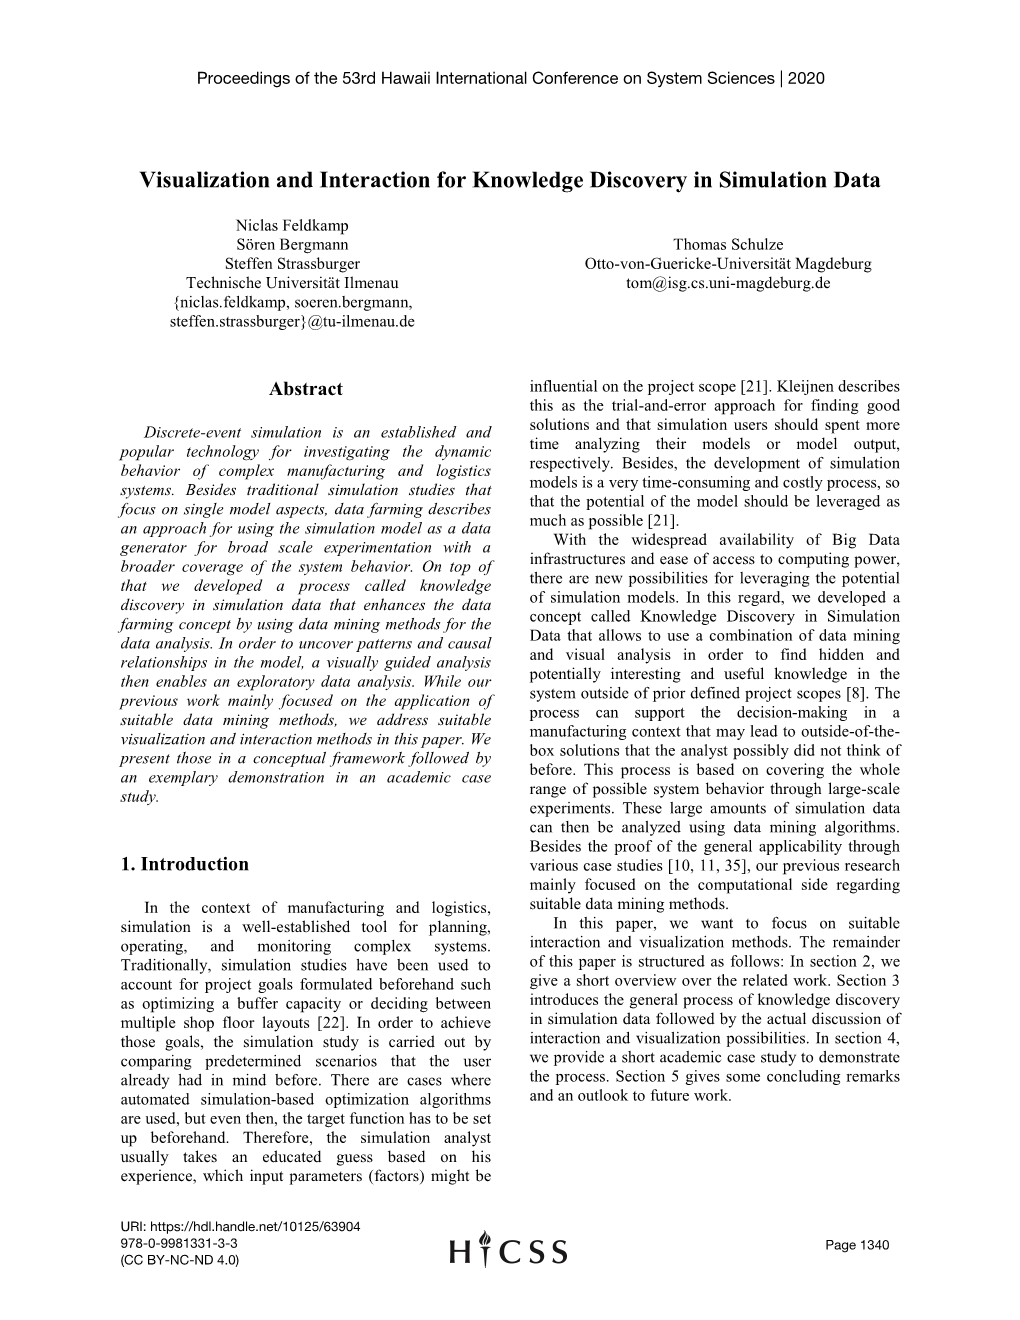 Visualization and Interaction for Knowledge Discovery in Simulation Data